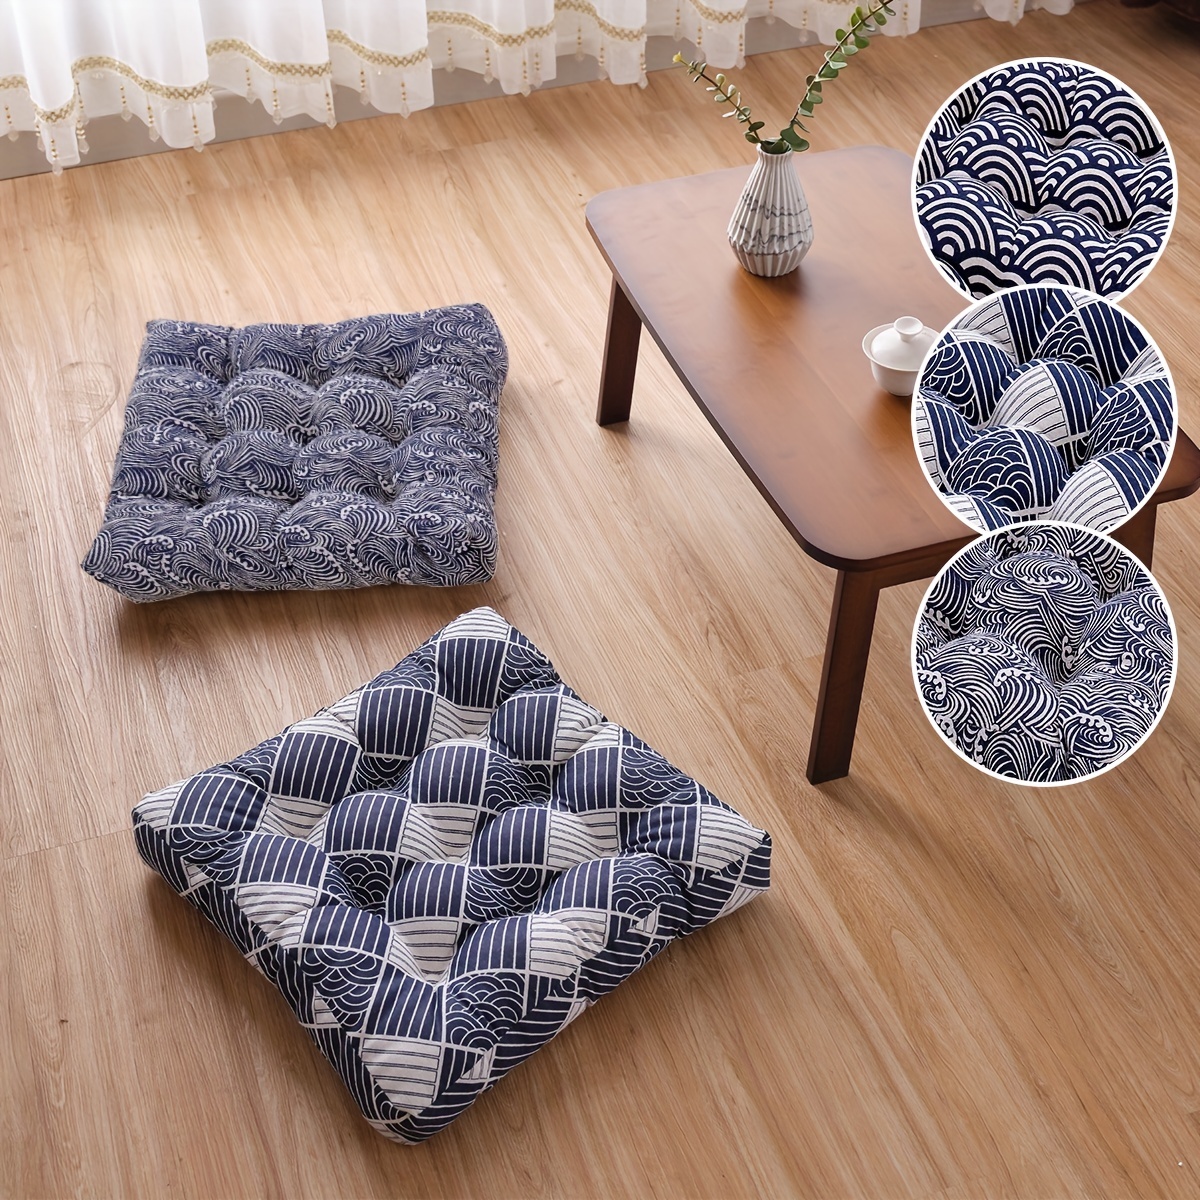 2023 Bamboo Seat Cushion, Summer Sofa Cooling Mats Cooling Pad,  Breathable/Anti-Slip Couch Cushion for Indoor Bay Window//Tatami /Sofa